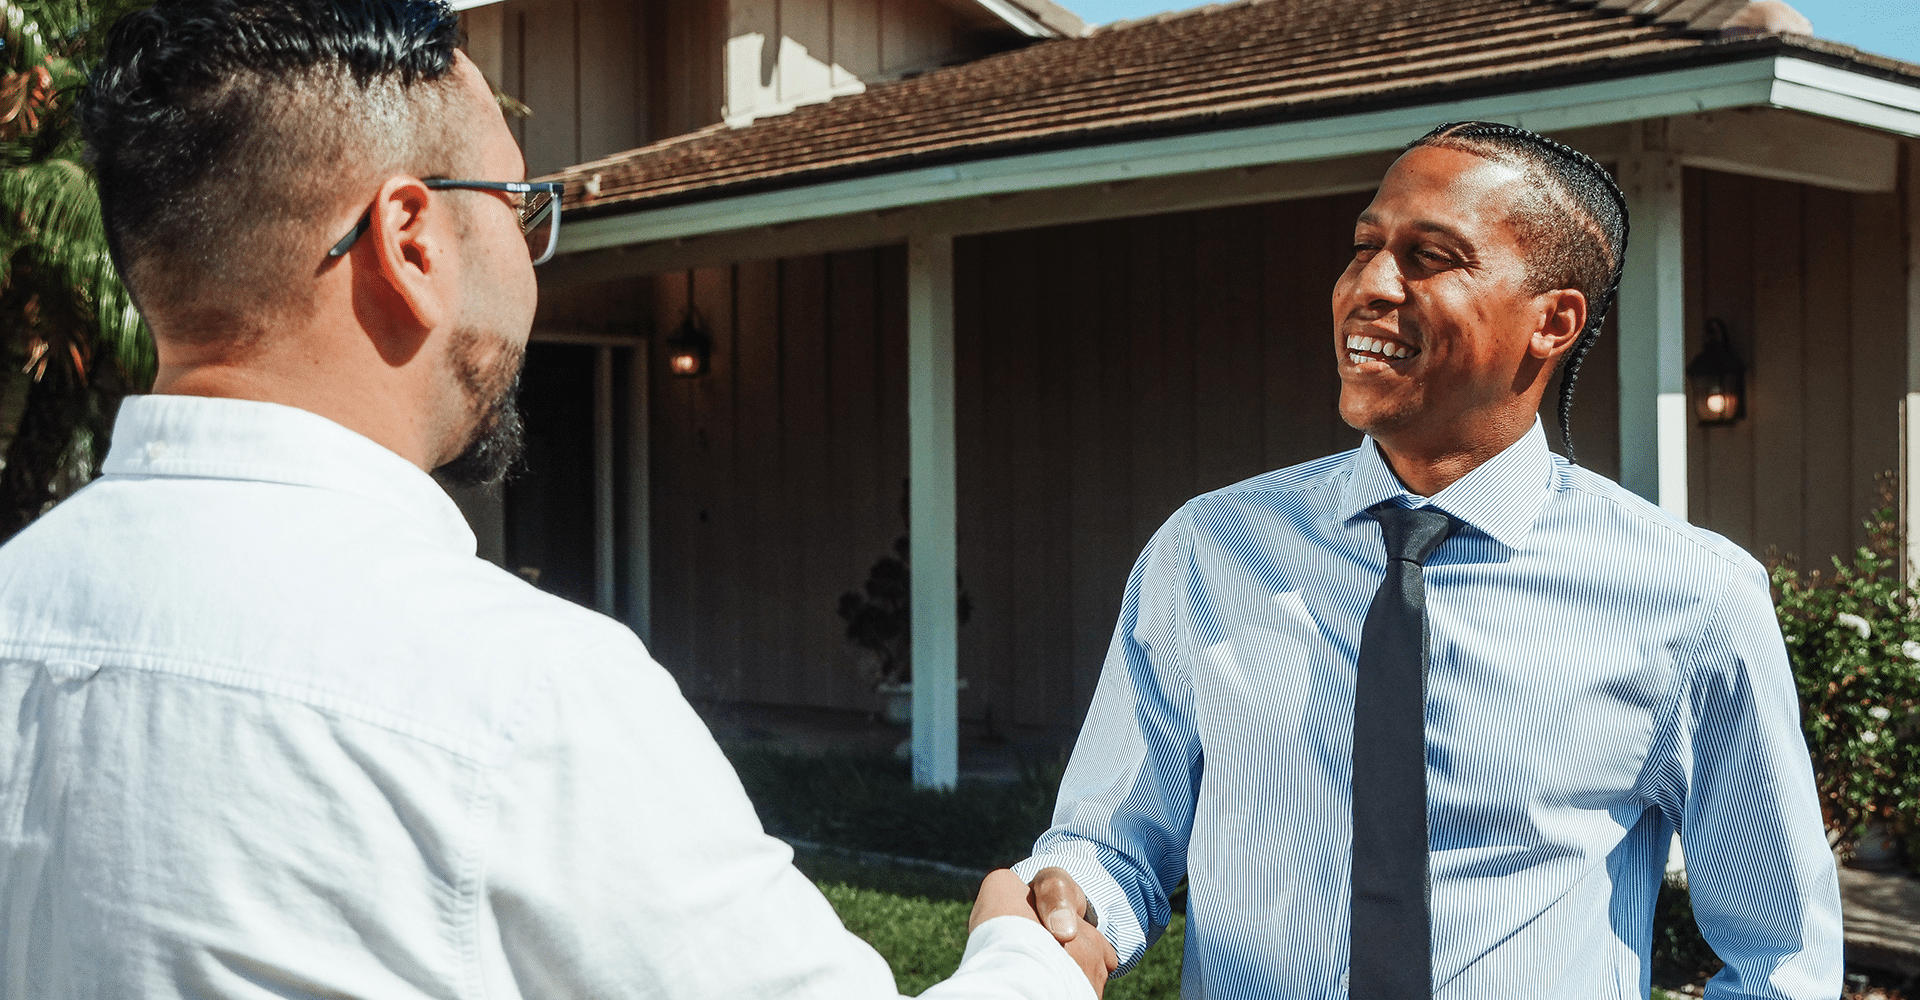 successful male real estate agent in tie smiling shaking hands with customer